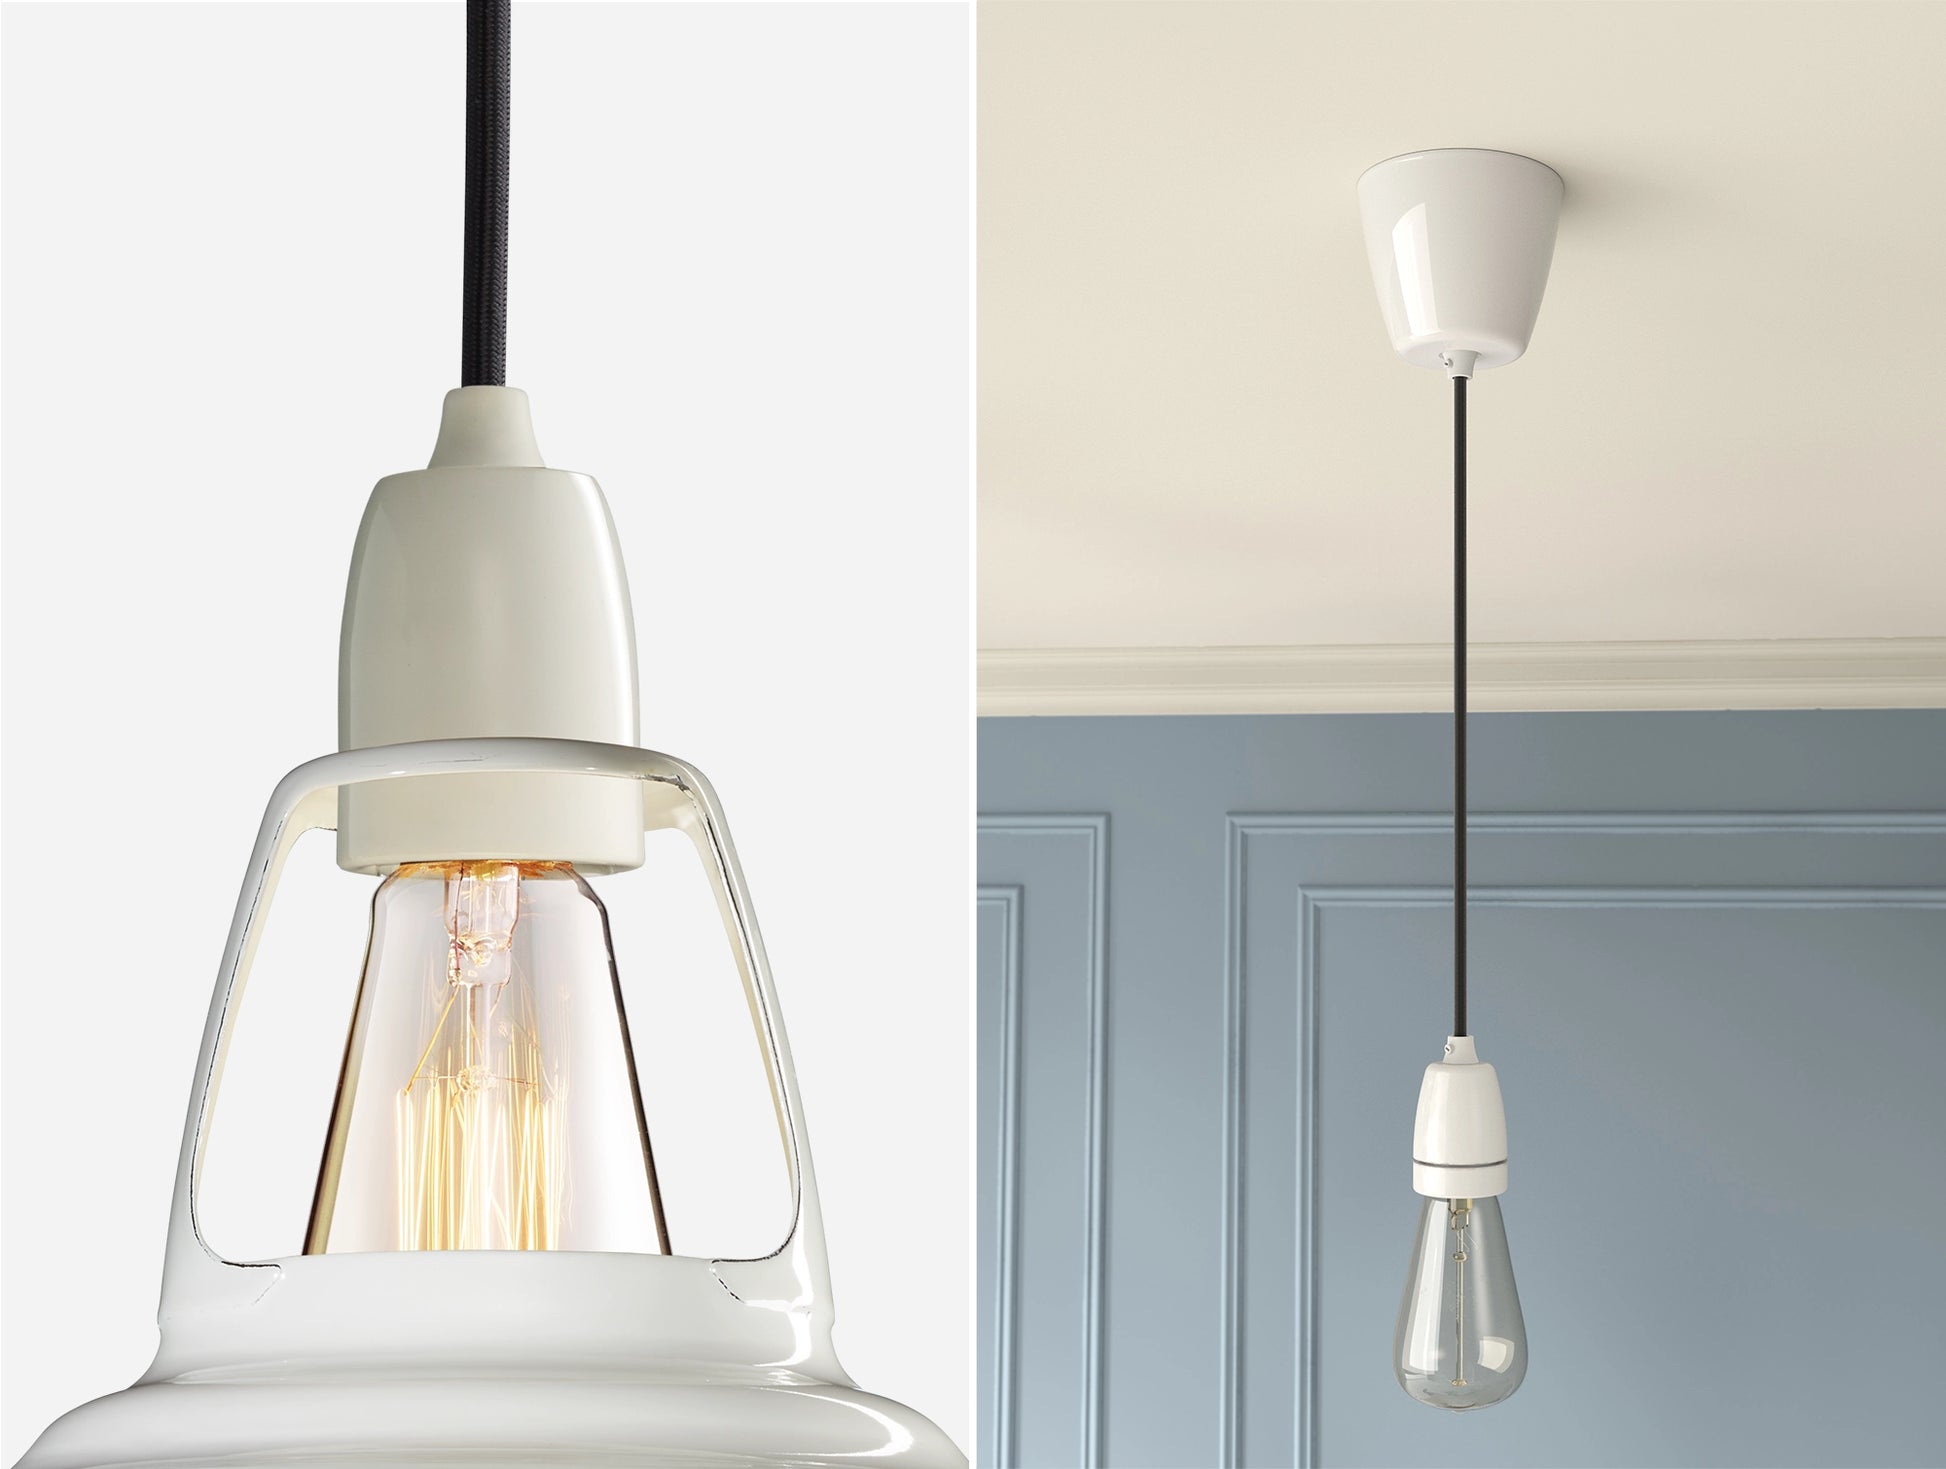 Close up of an E27 Porcelain suspension set on a Original White lampshade on the left. On the right, an E27 Porcelain pendant set with a lightbulb is hanging from the ceiling